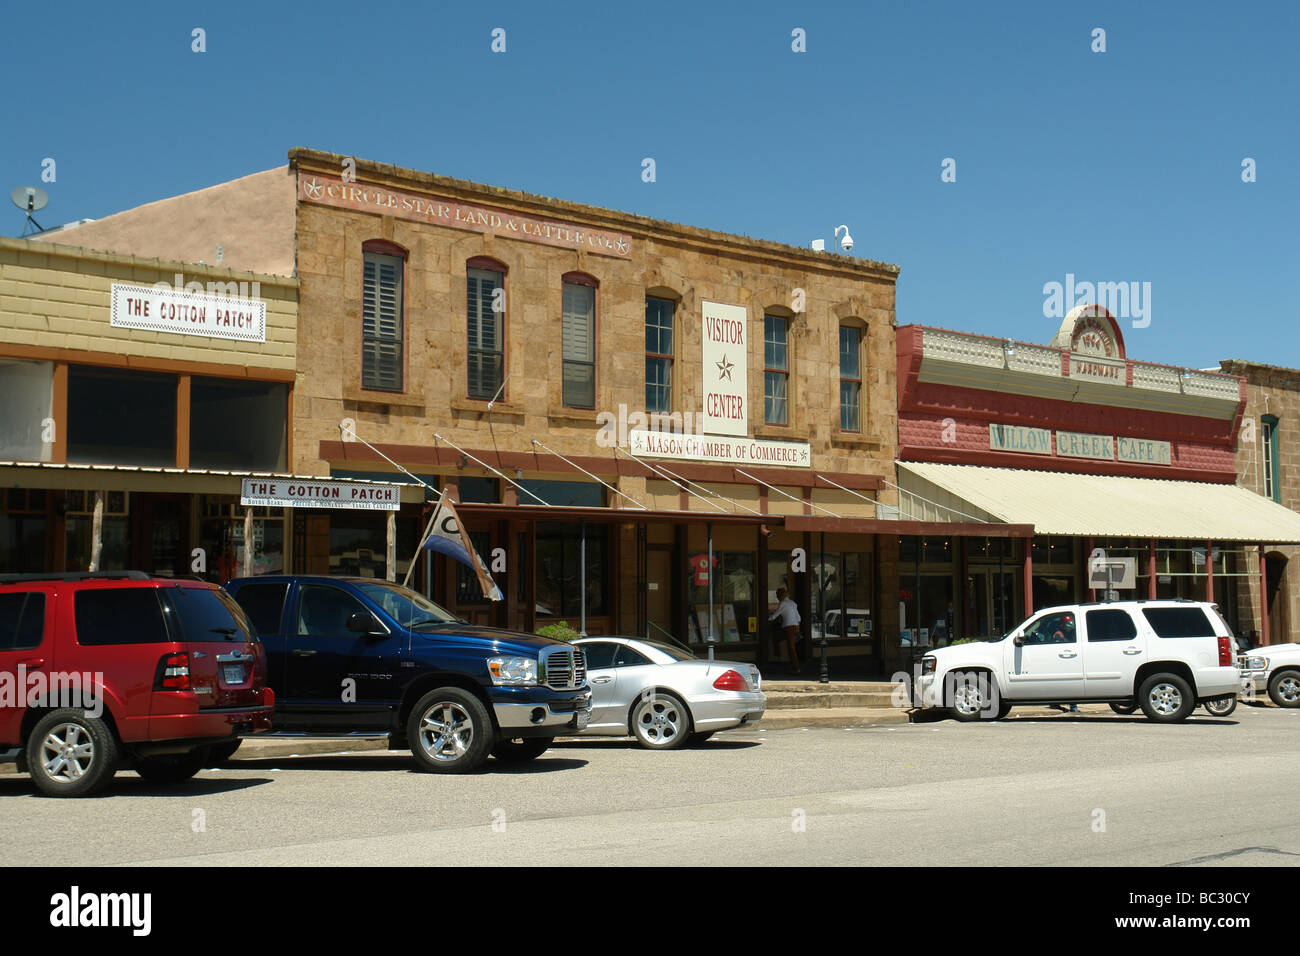 Mason, Texas, Texas Hill Country, Banque D'Images